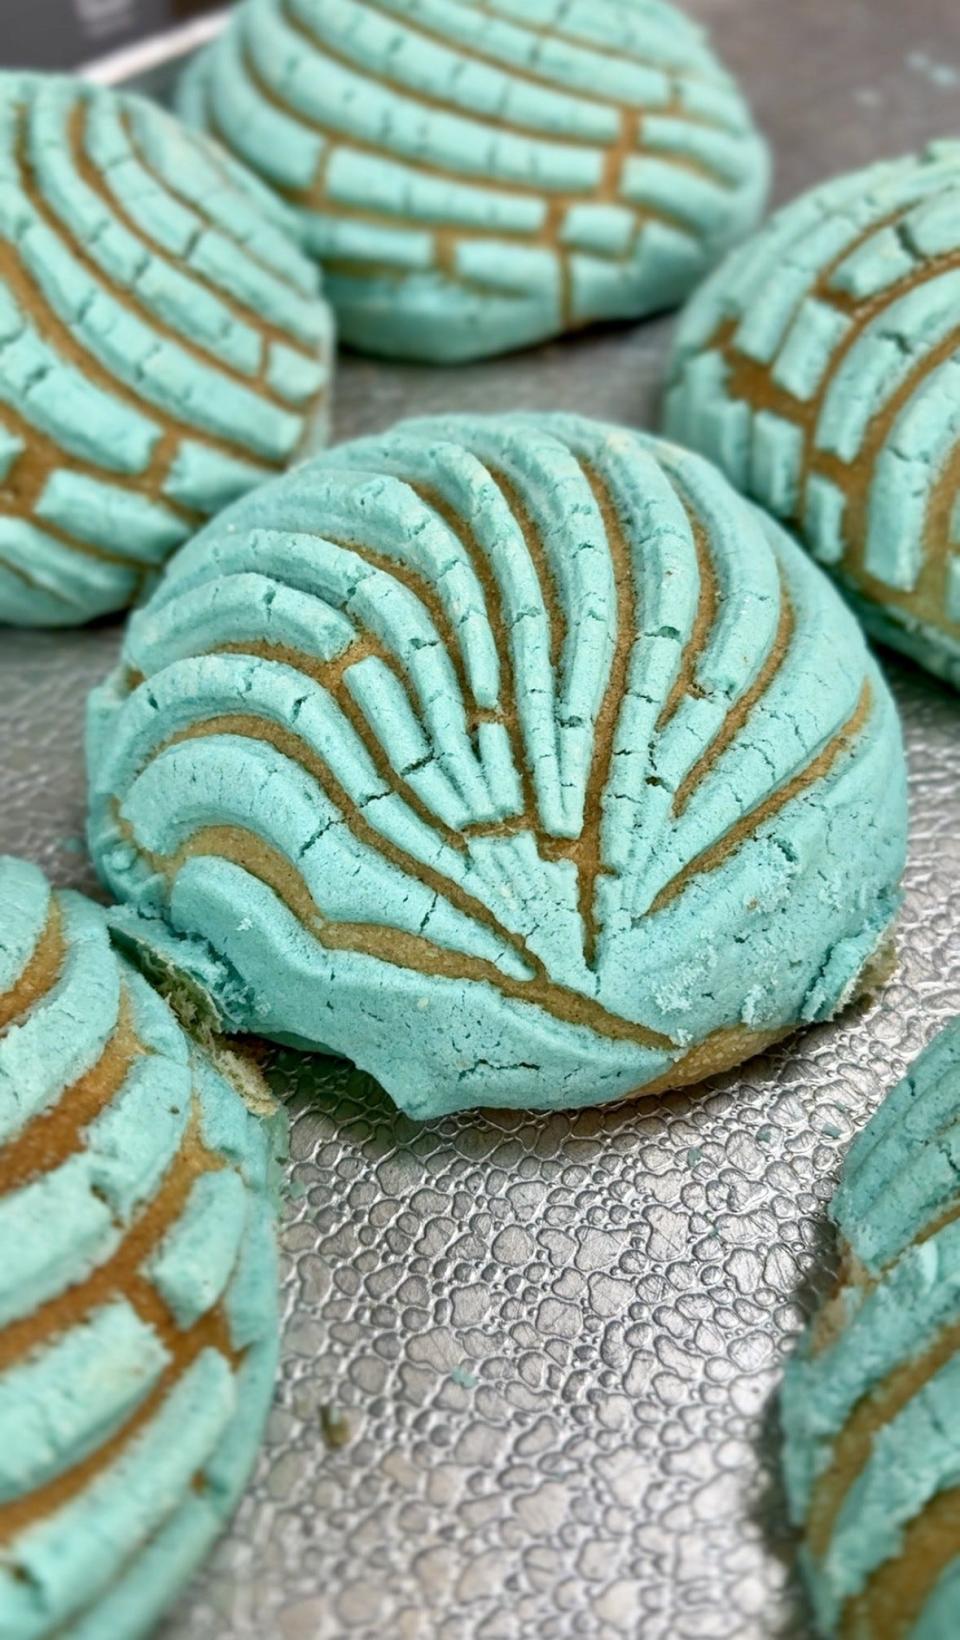 Food City will have blue conchas as part of May the Fourth celebrations. The conchas are available for purchase at all Food City locations.